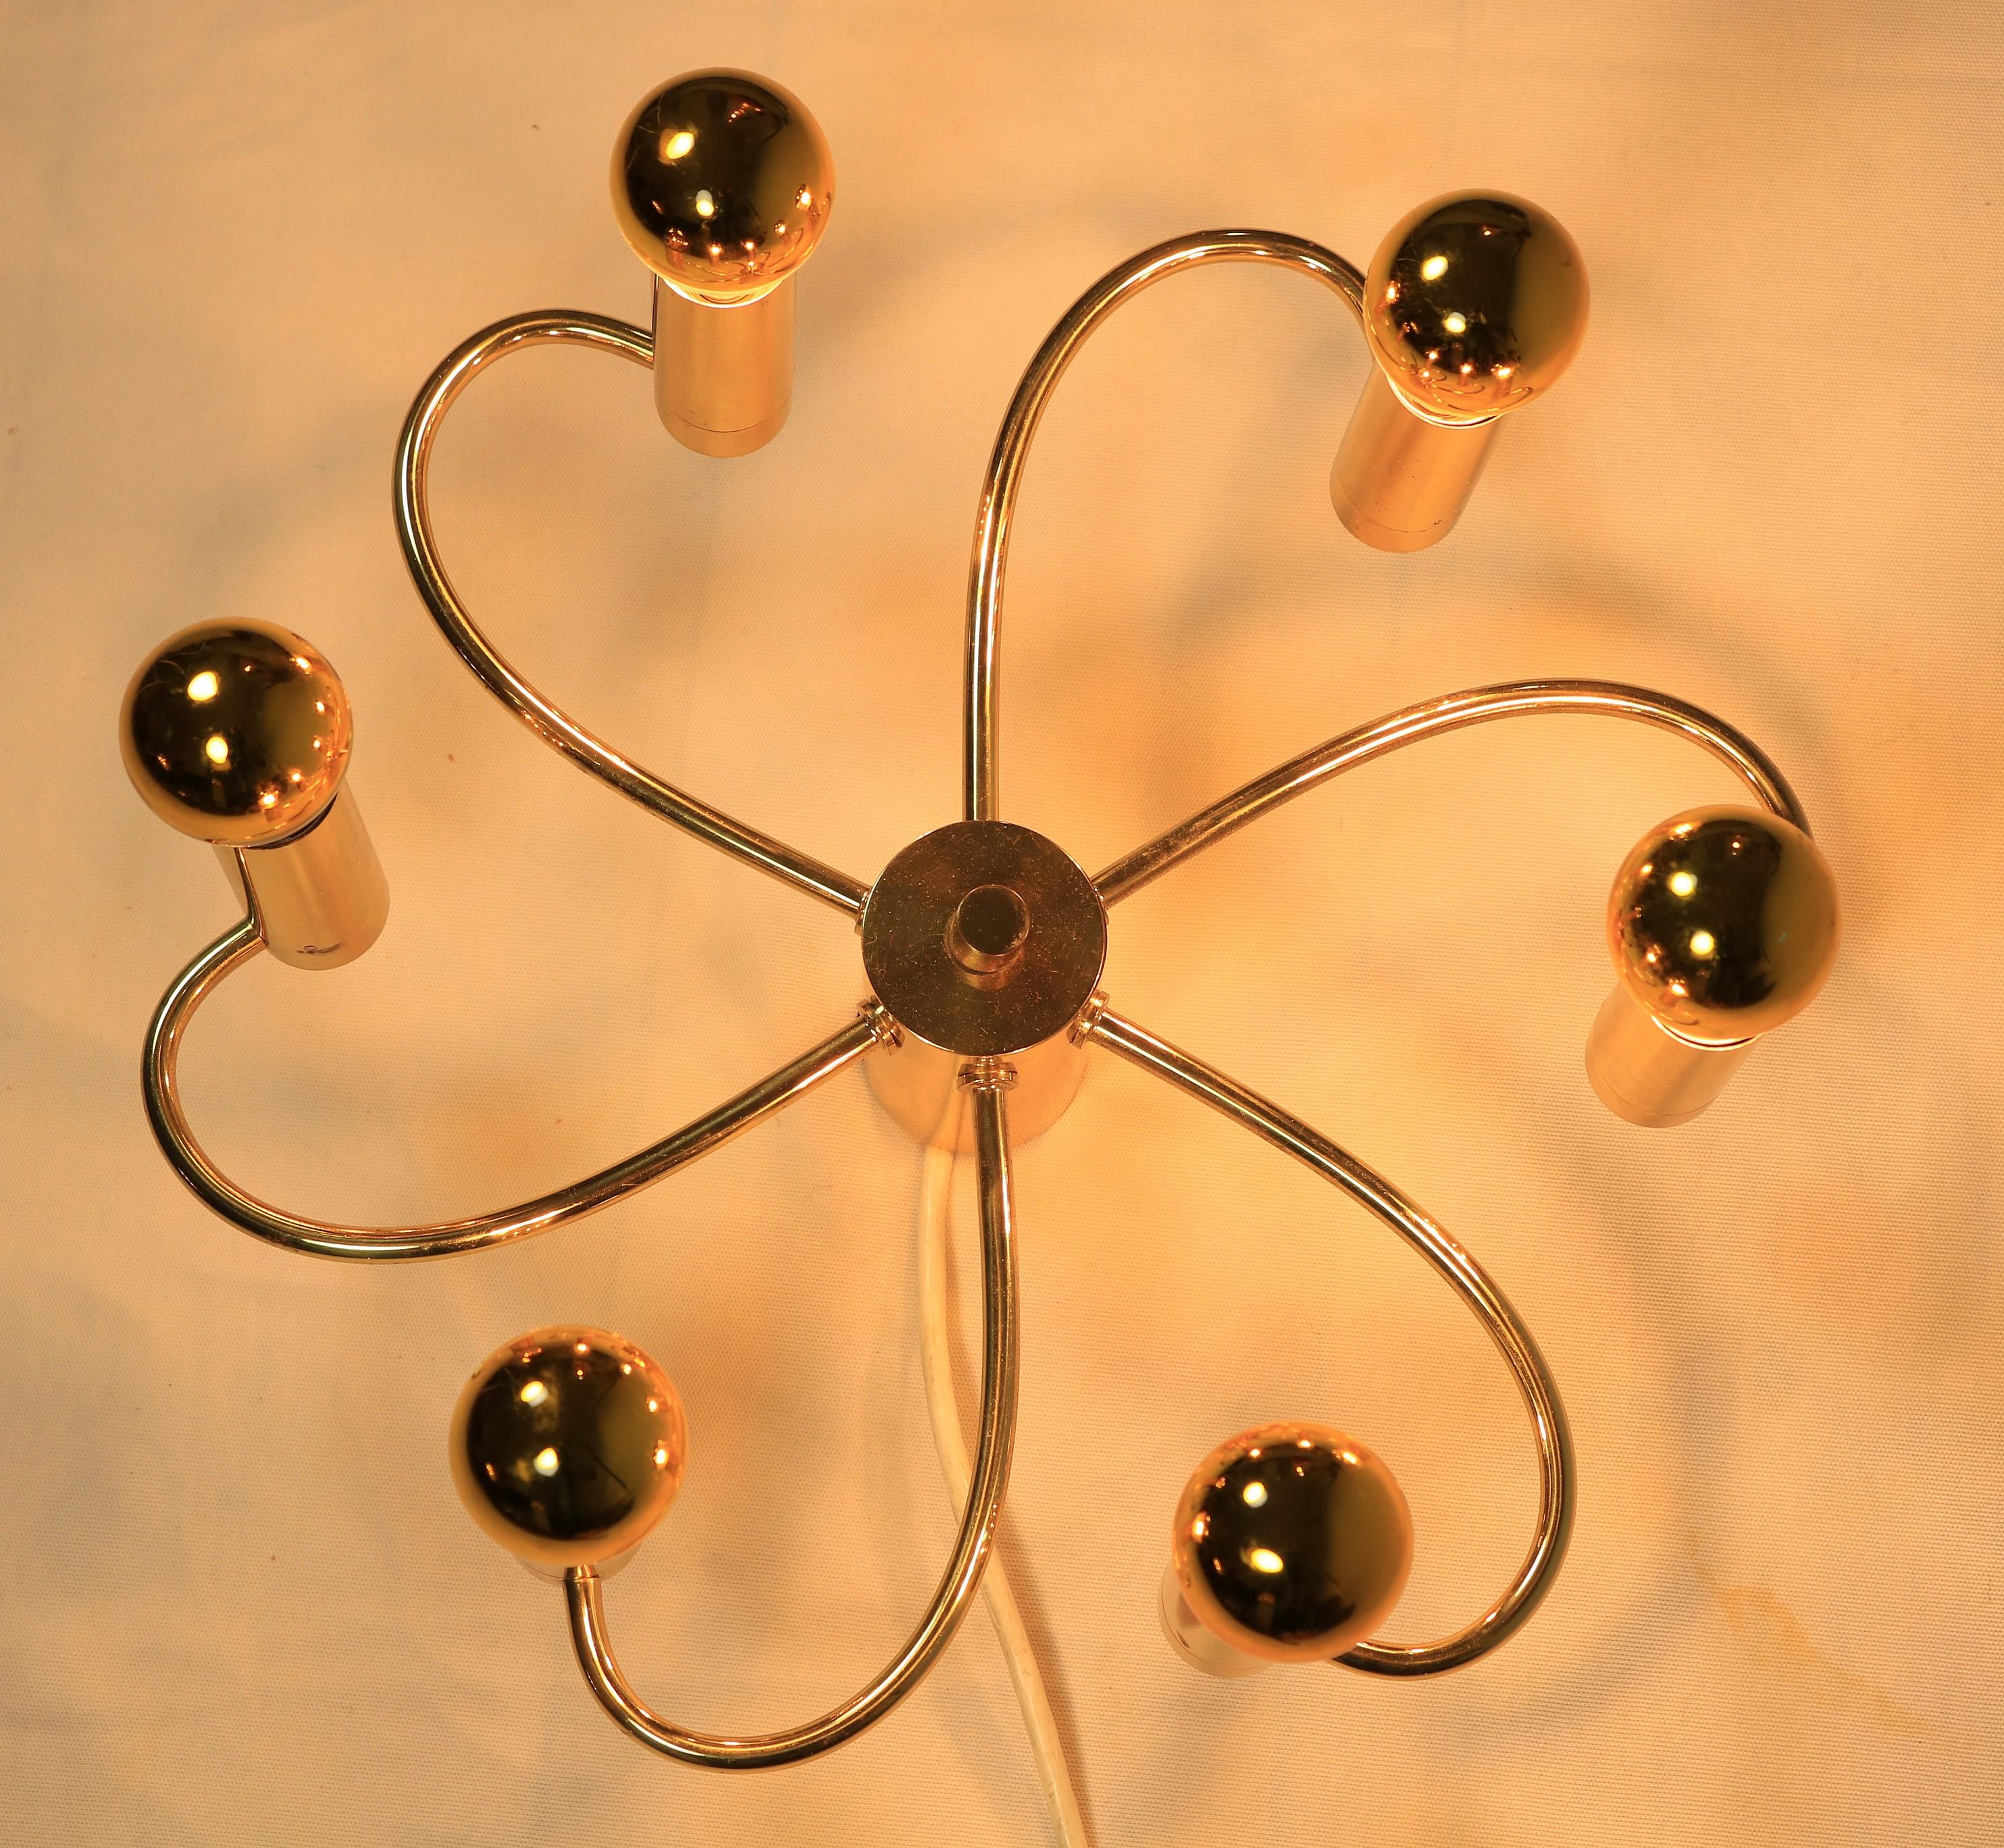 Very decorative wall or ceiling lamp by Cosack.

Spiral brass arms with a total of six E14 sockets.
The golden head mirror bulbs are included and complete the elegant look.

Diameter: 35 cm / 13.8 inches.